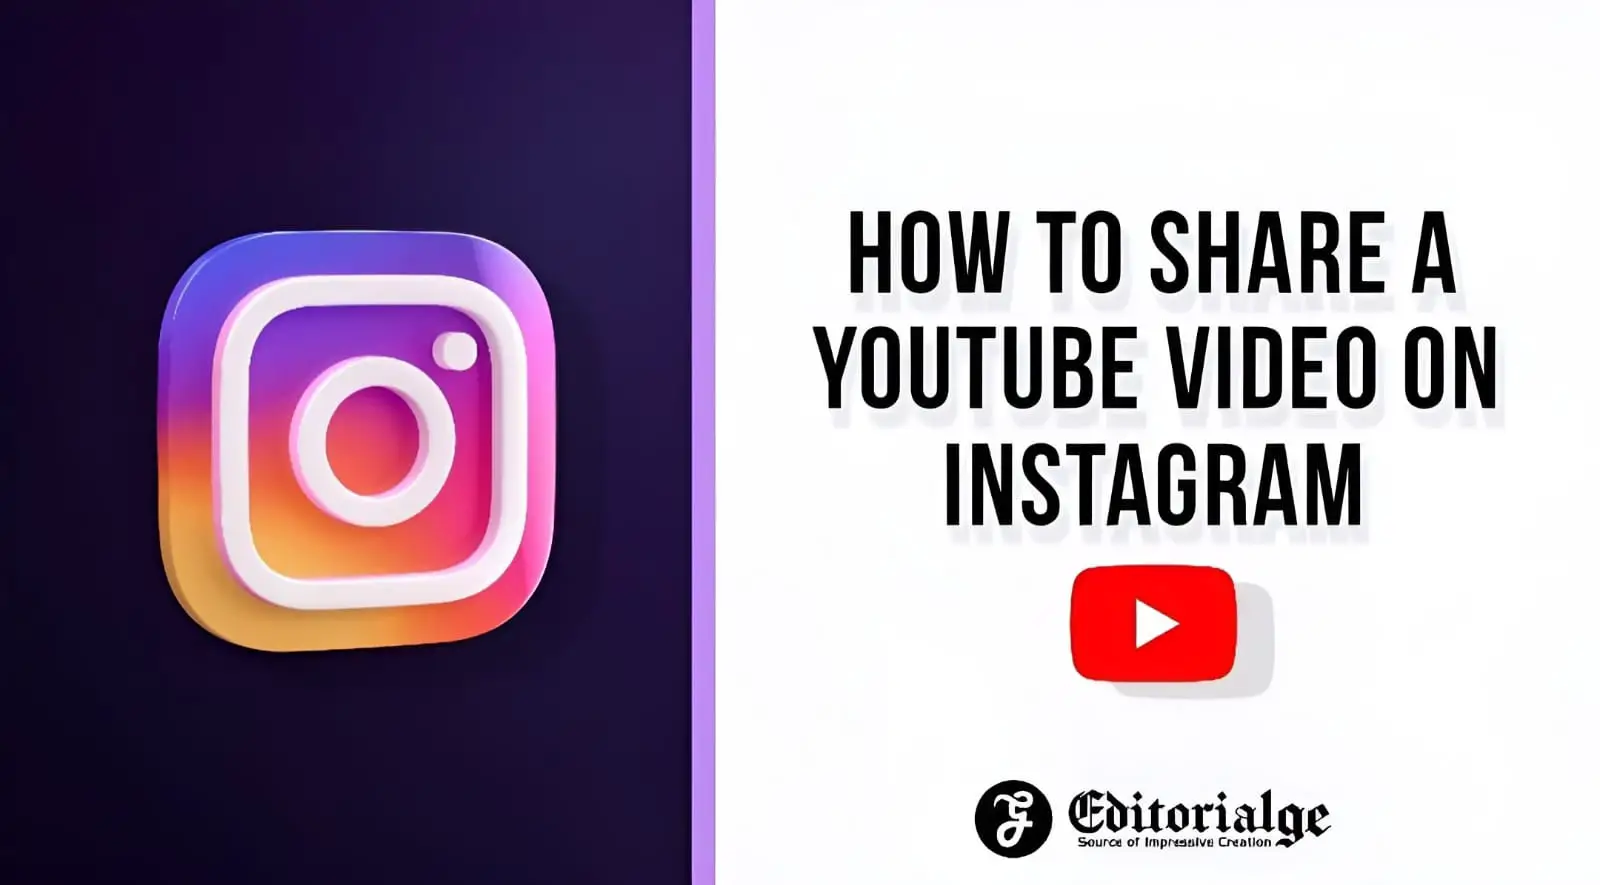 How to Share a Youtube Video on Instagram